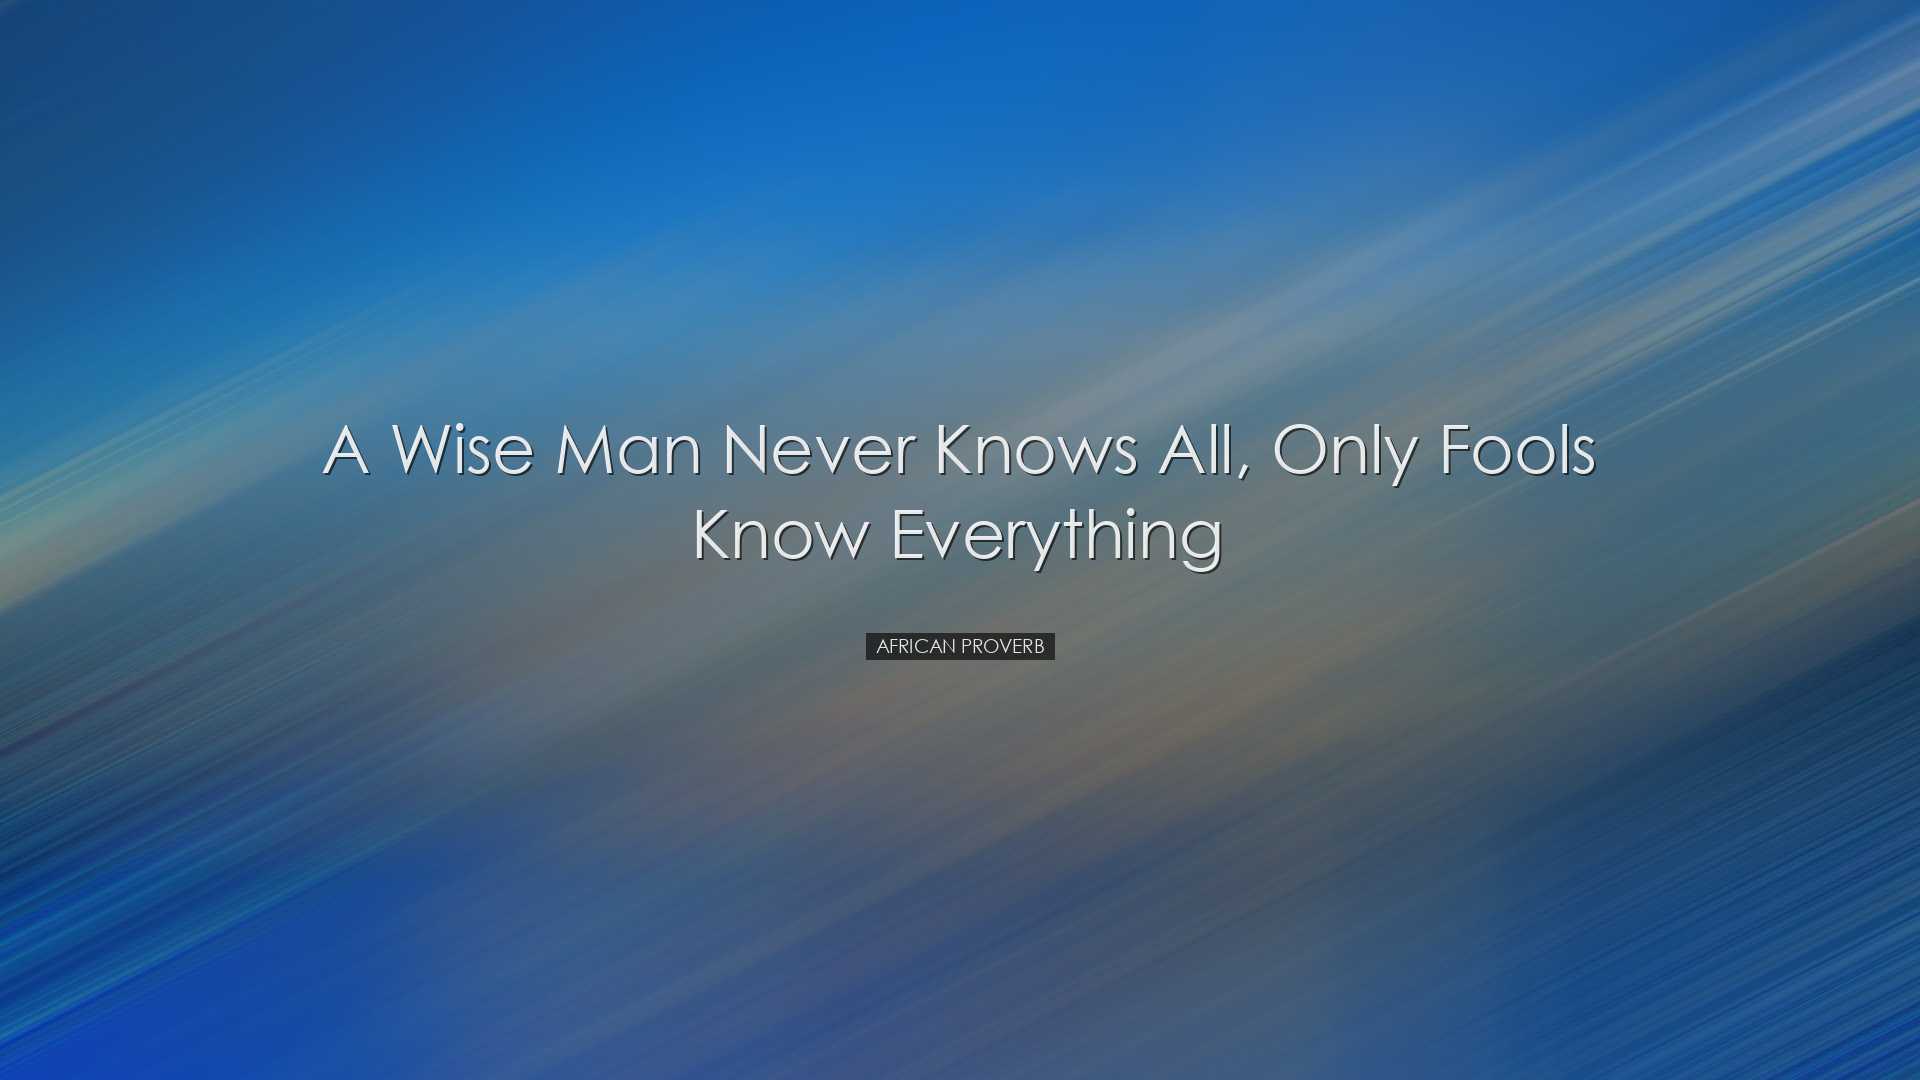 A wise man never knows all, only fools know everything - African P